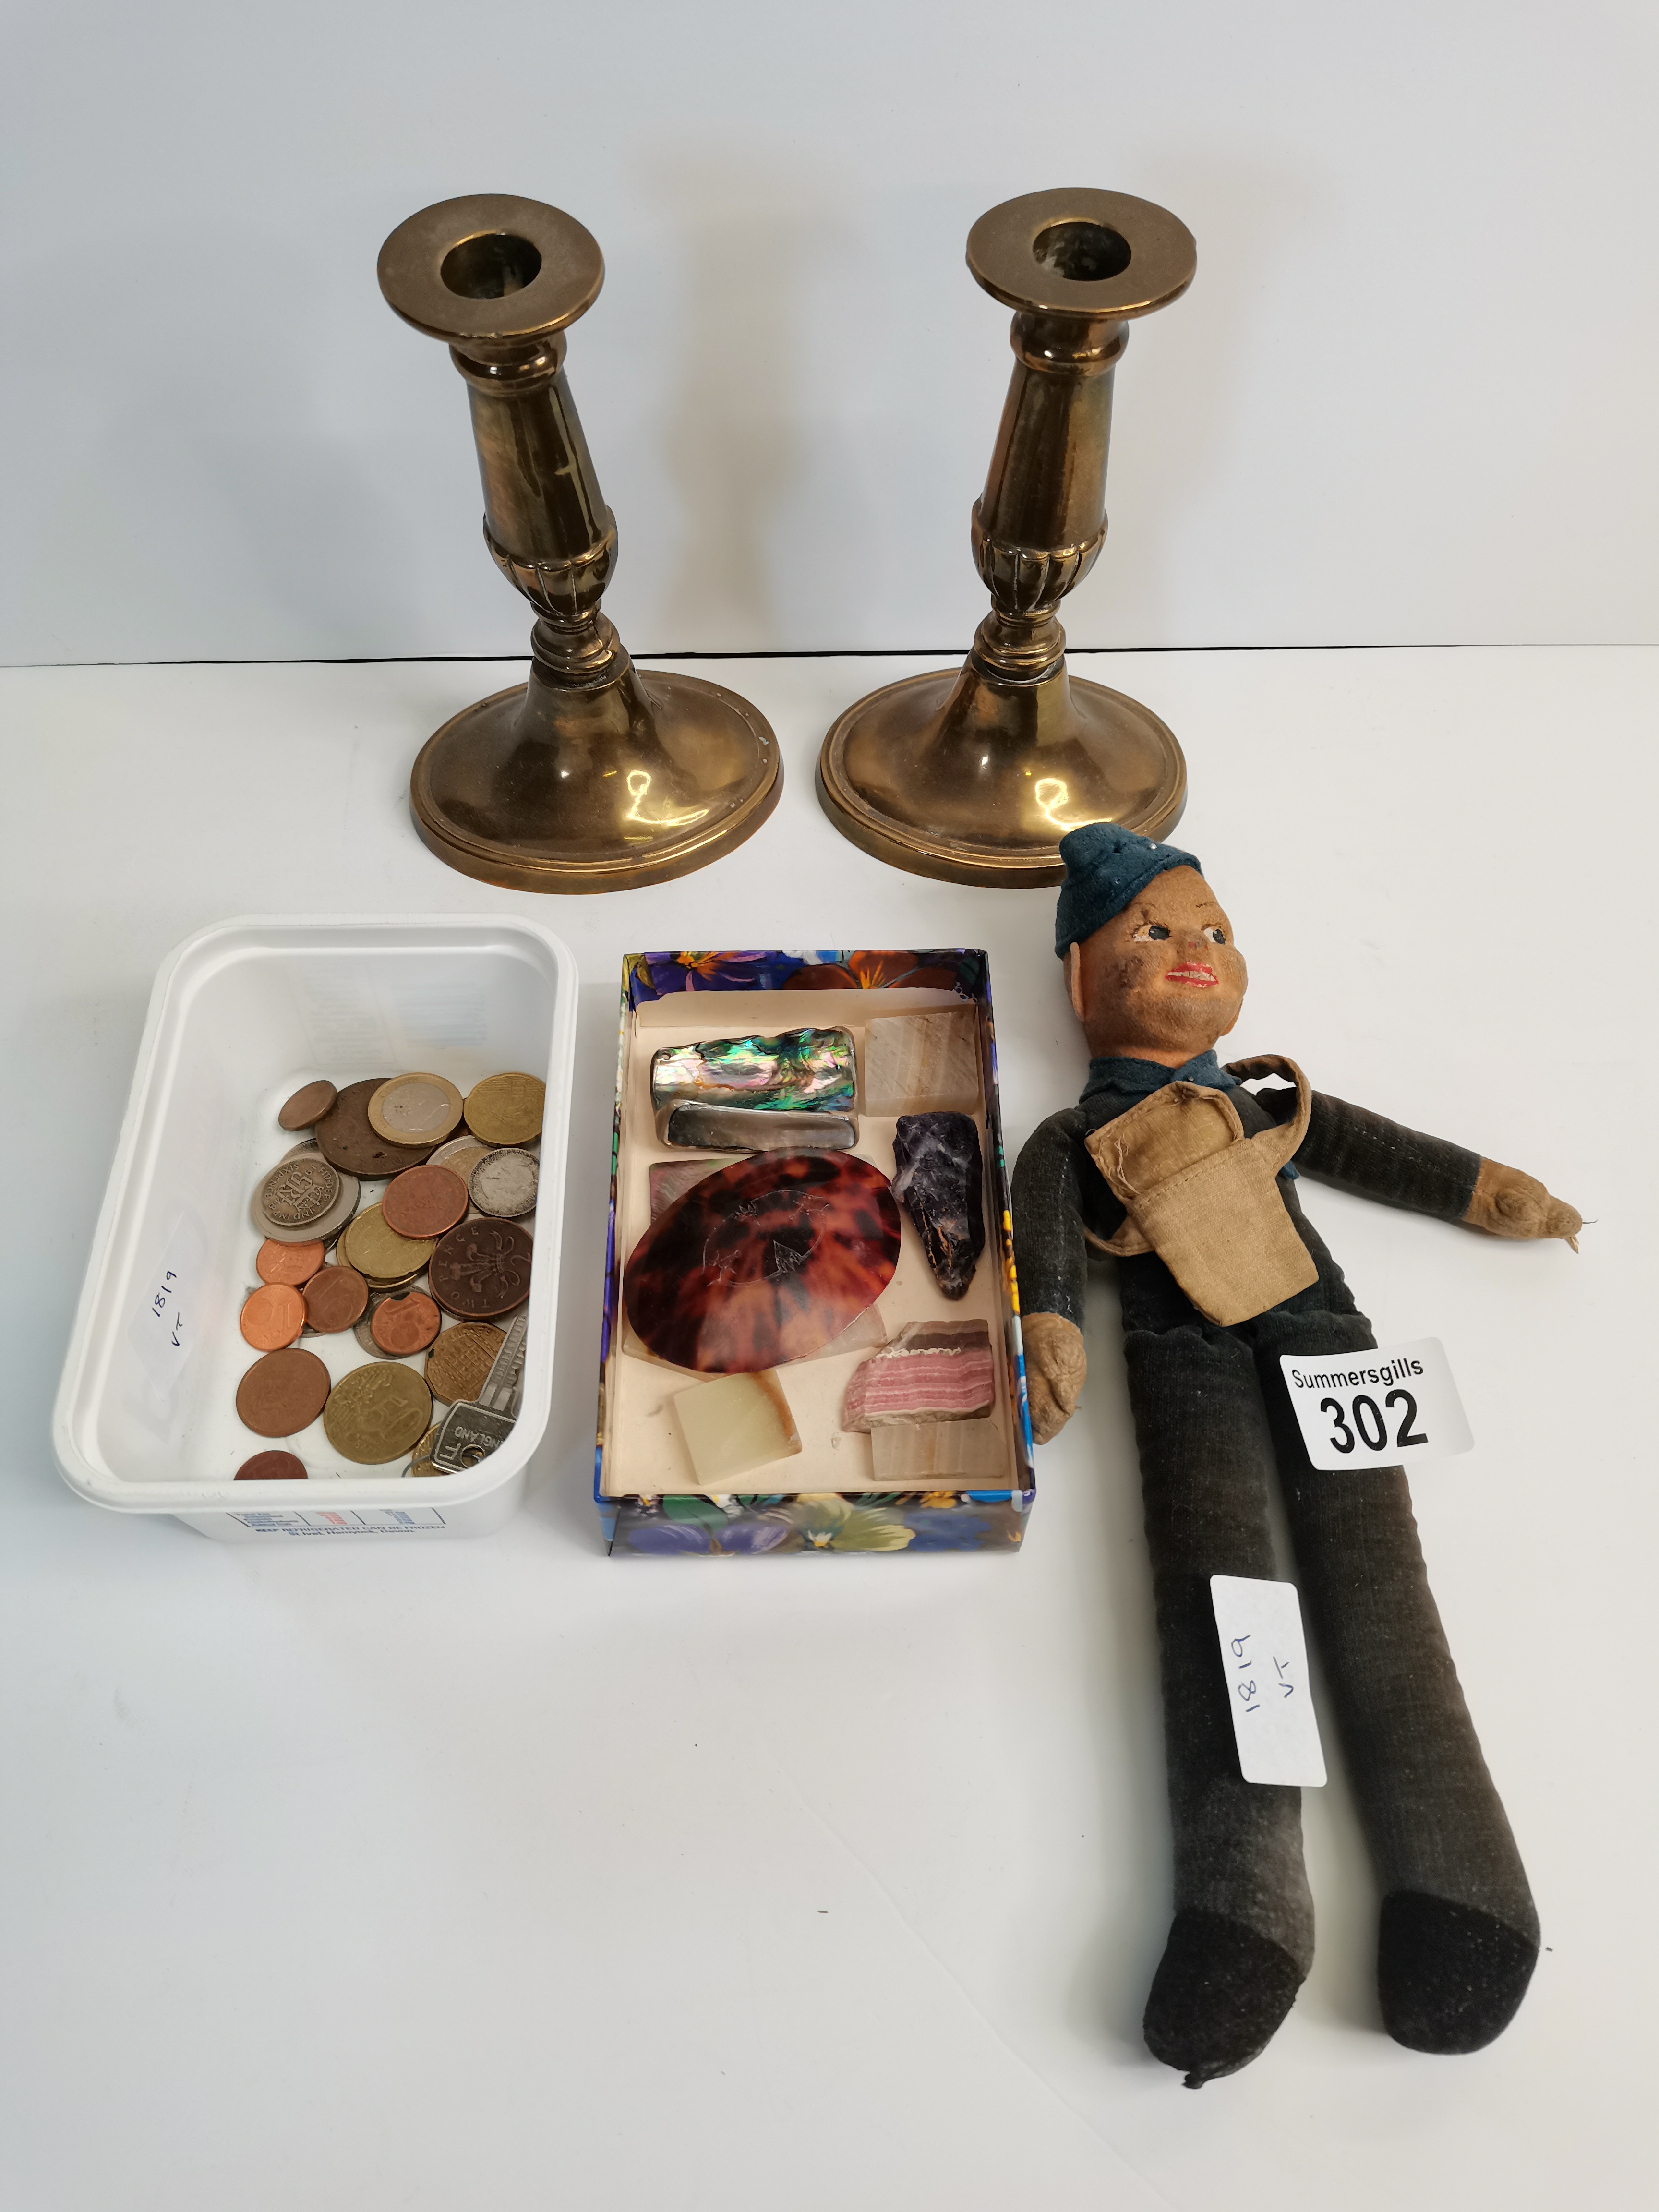 Misc items incl brass candlesticks, old doll, coin